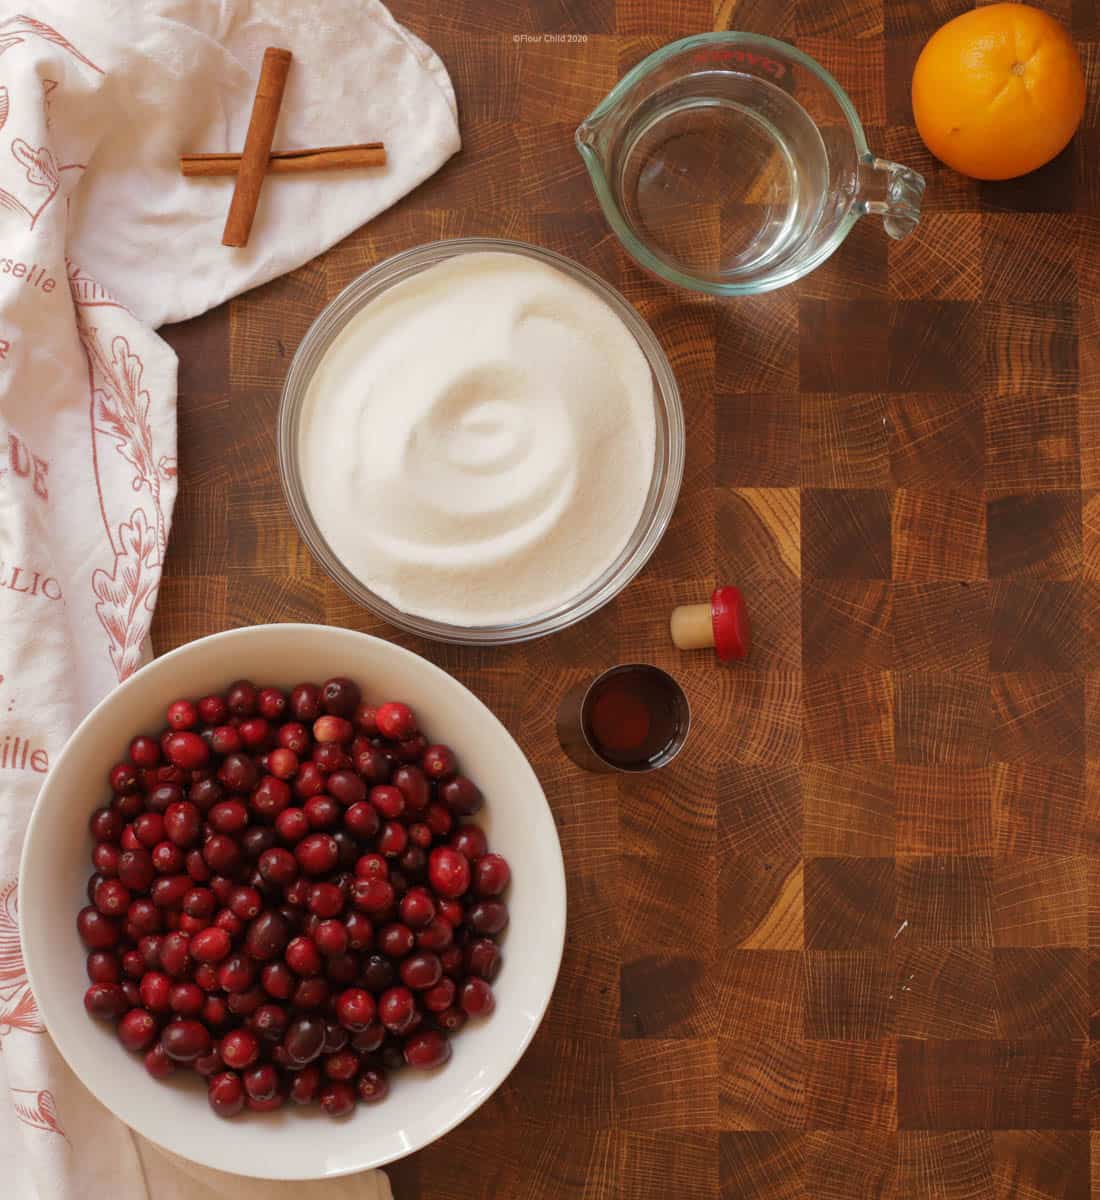 Just a few ingredients are needed for delicious Bourbon Cranberry sauce